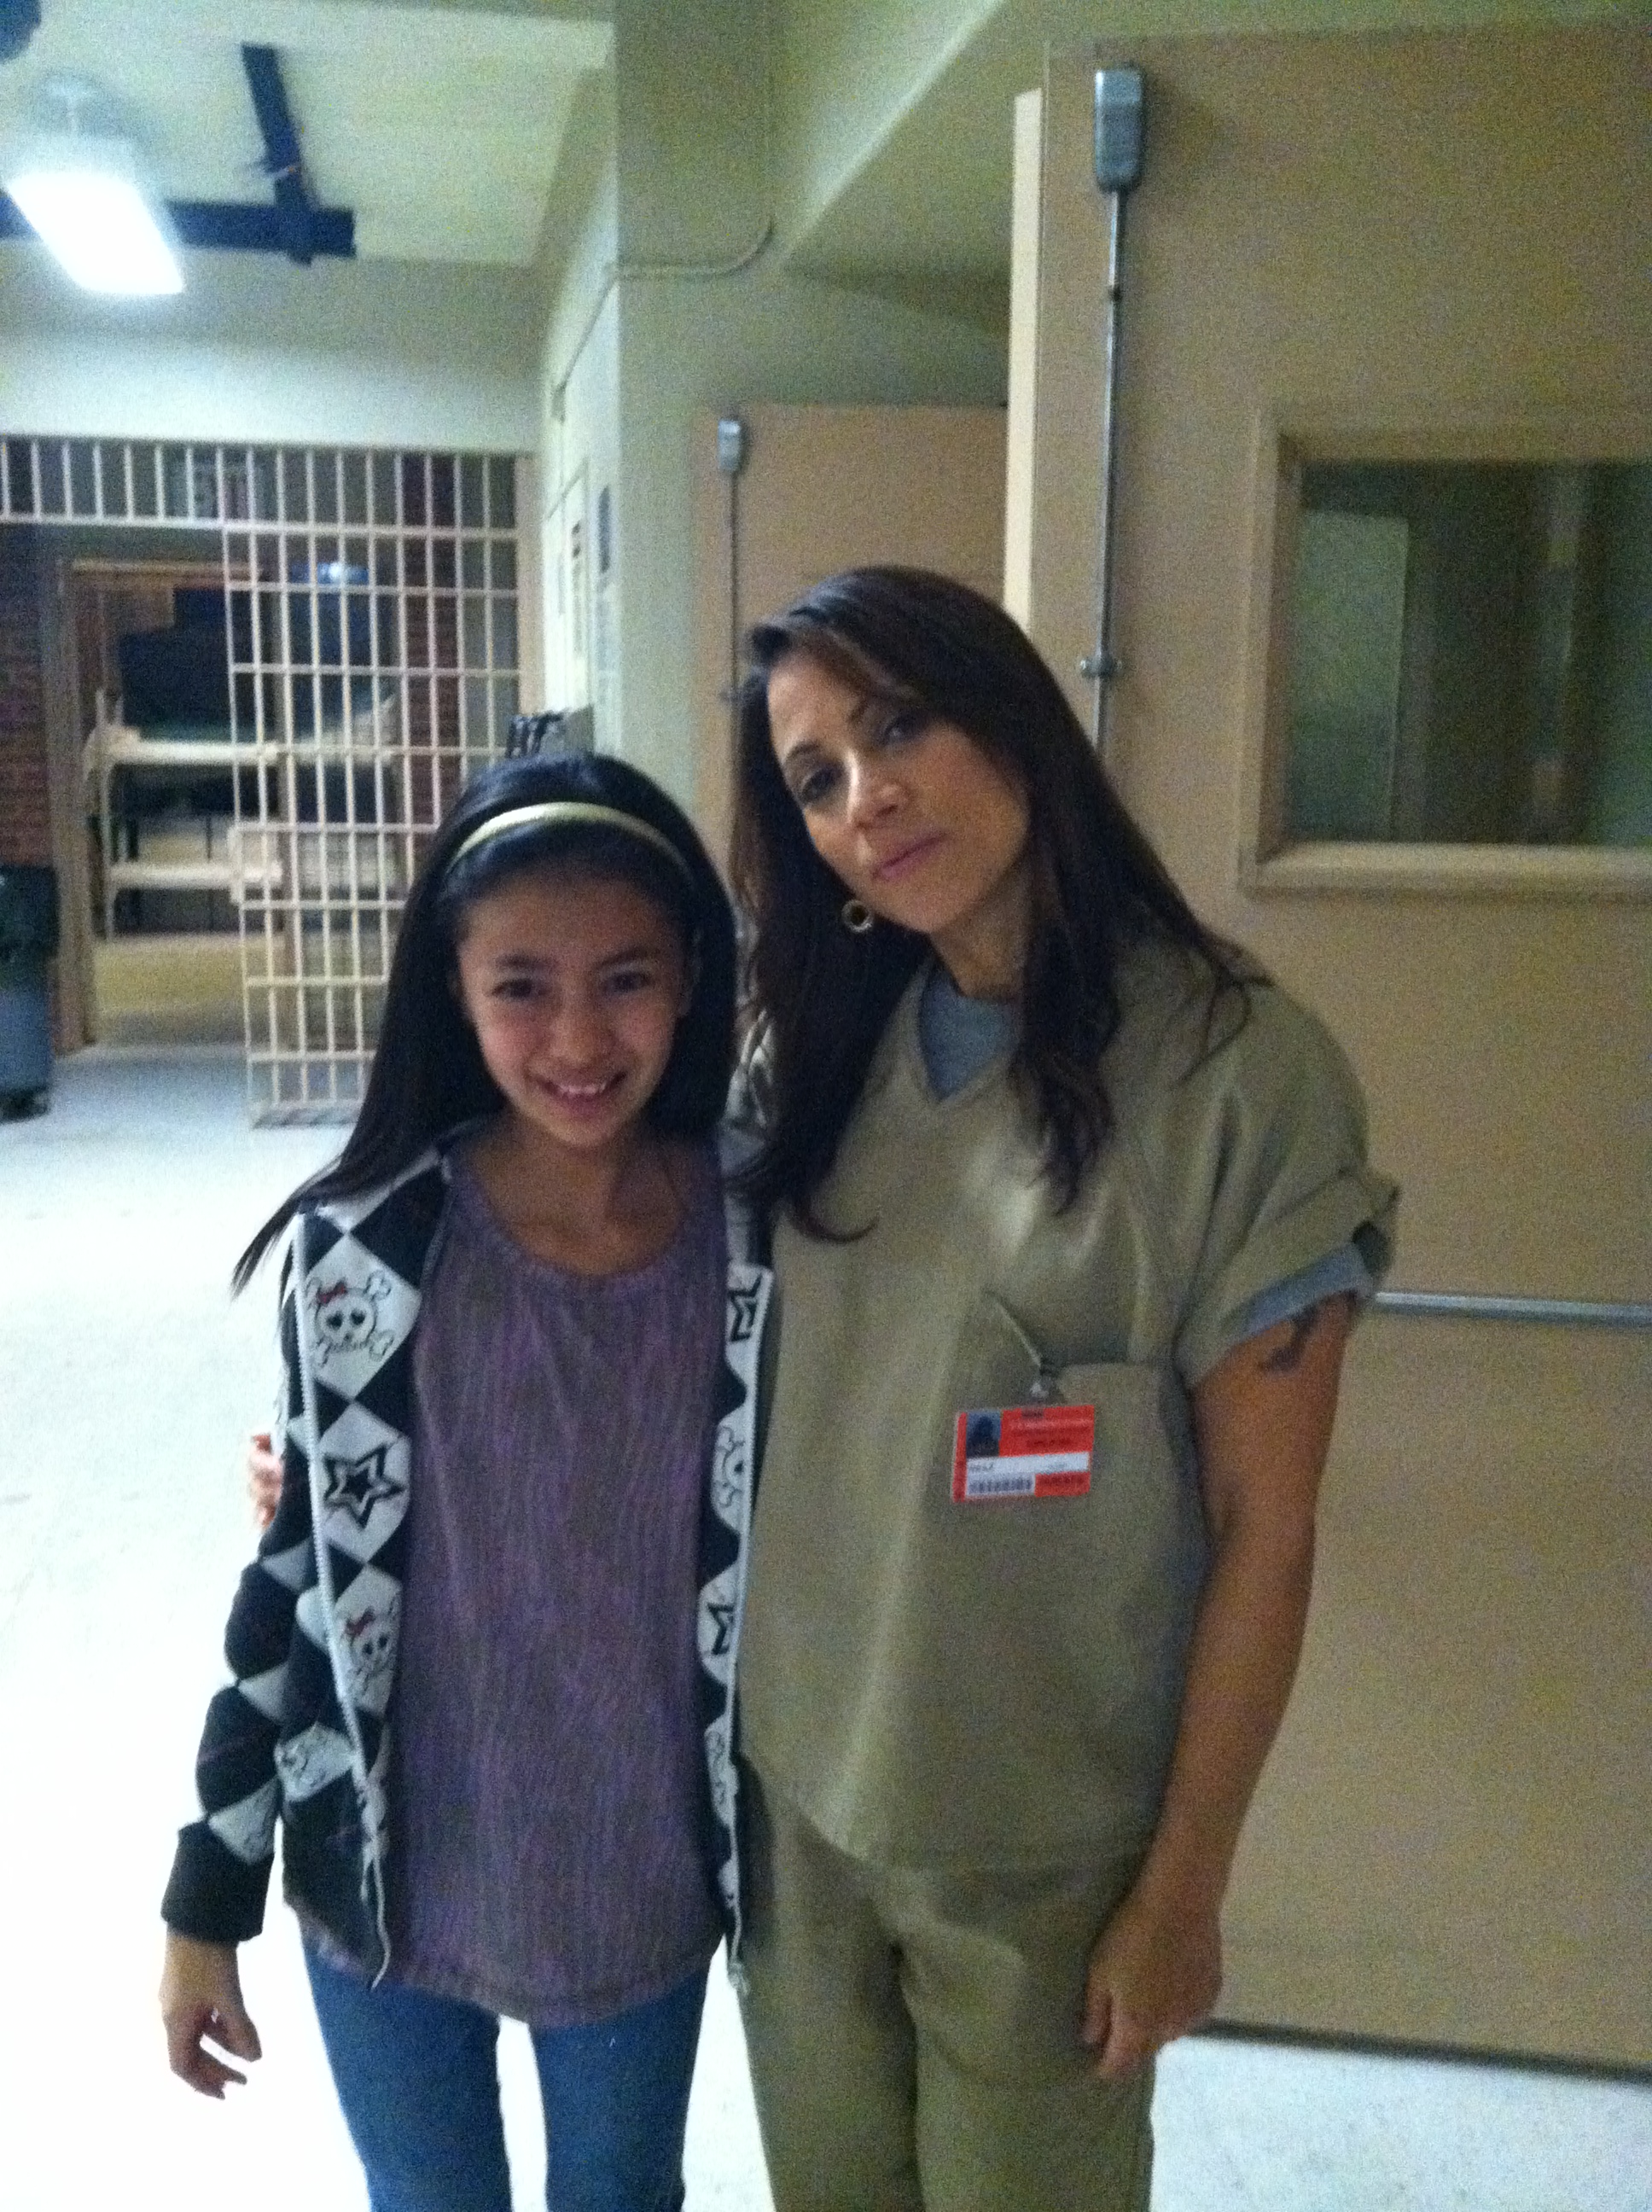 On set of Orange is the New Black with her on-screen mom